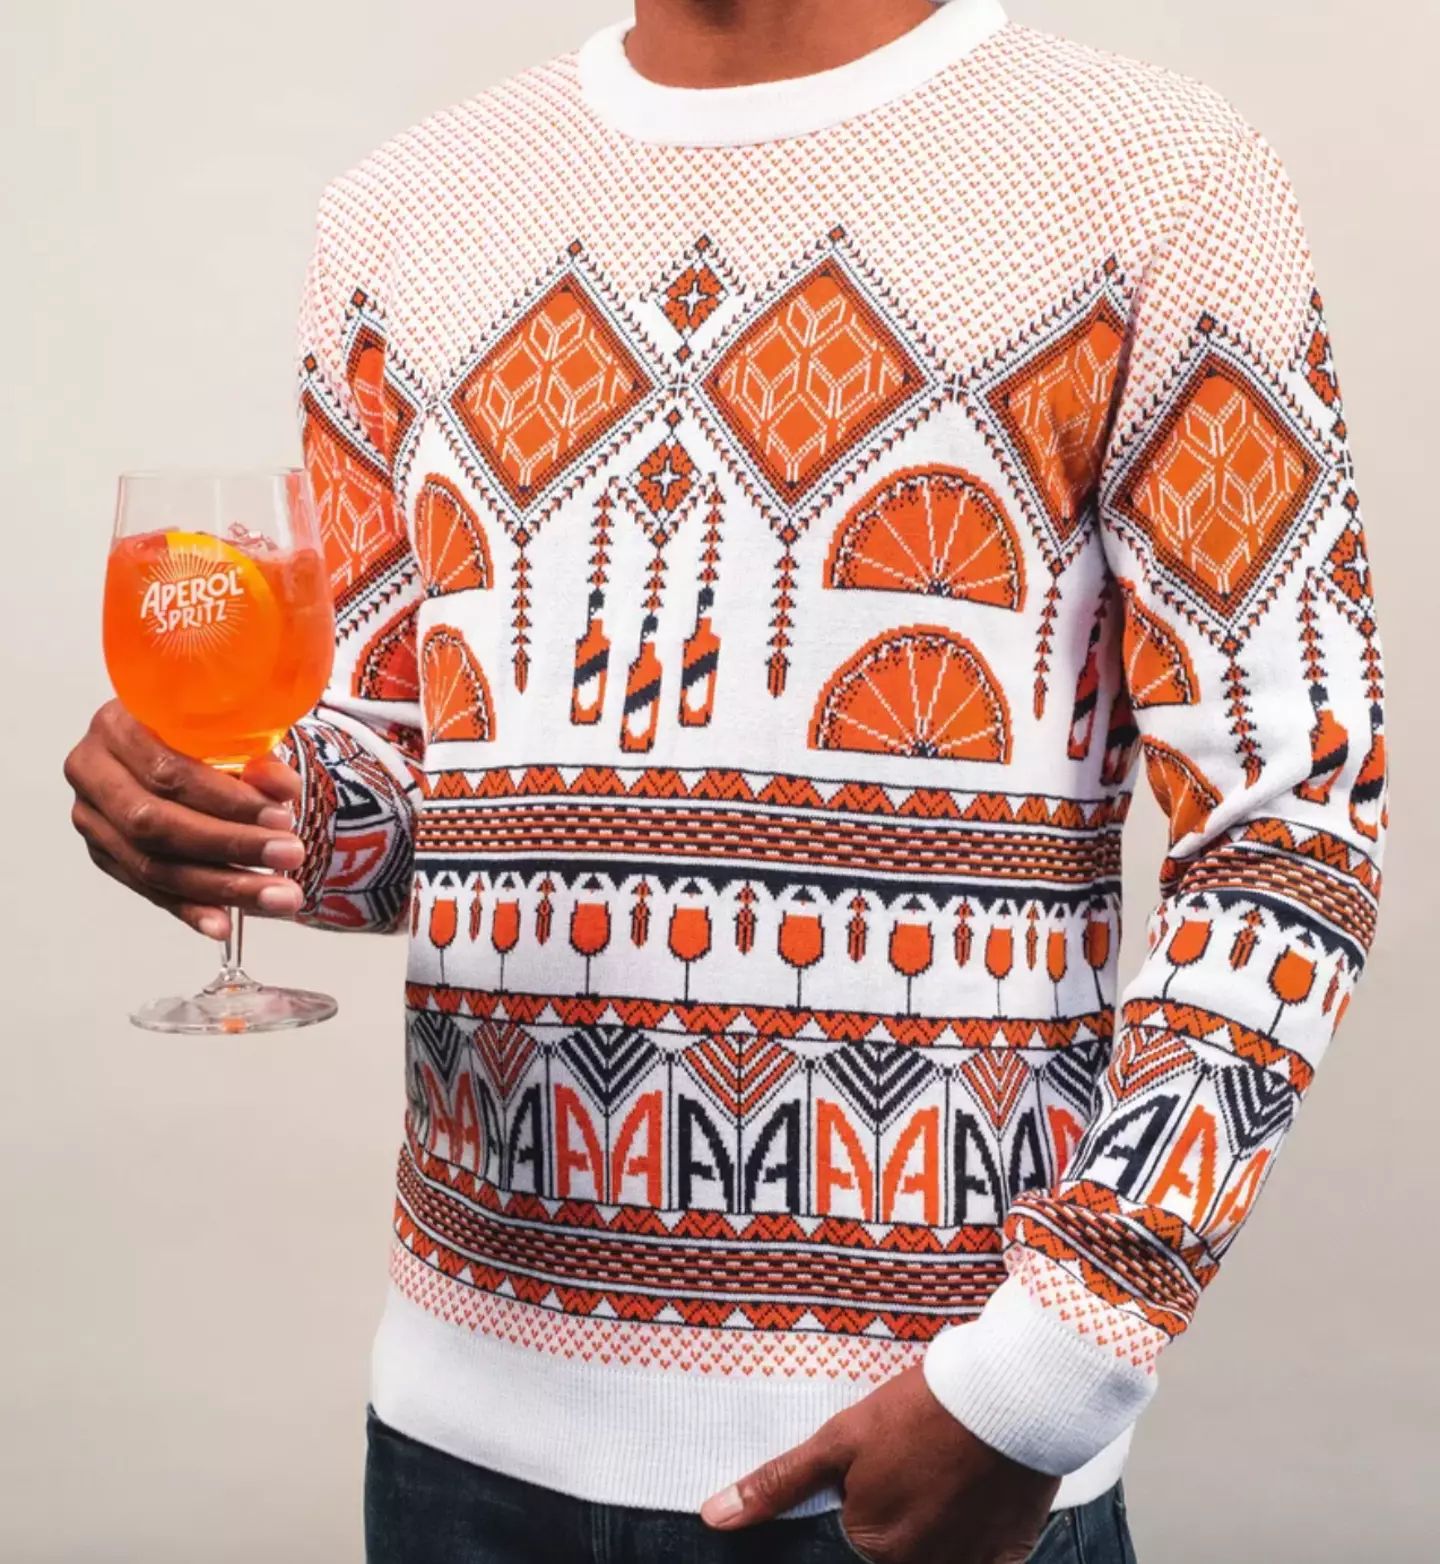 The unisex jumper goes best with an aperol spritz in hand (